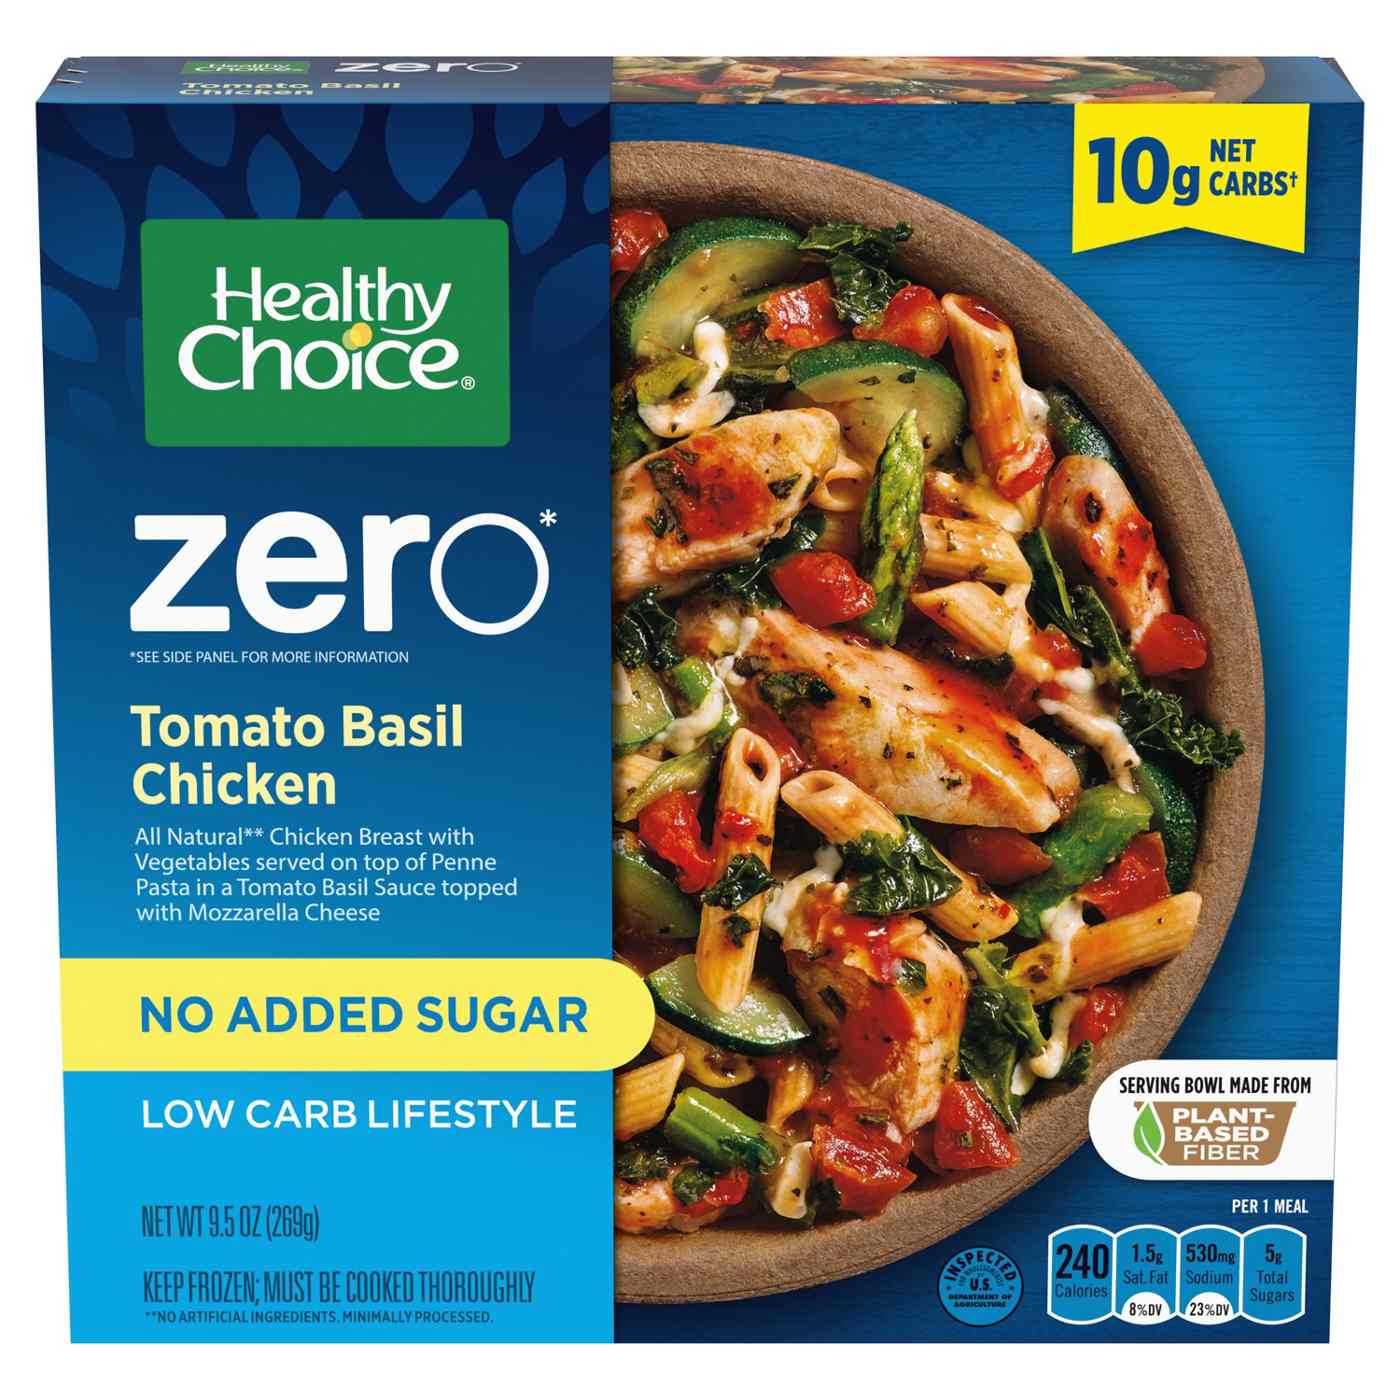 Healthy Choice Zero Low Carb Lifestyle Tomato Basil Chicken Frozen Meal; image 1 of 7